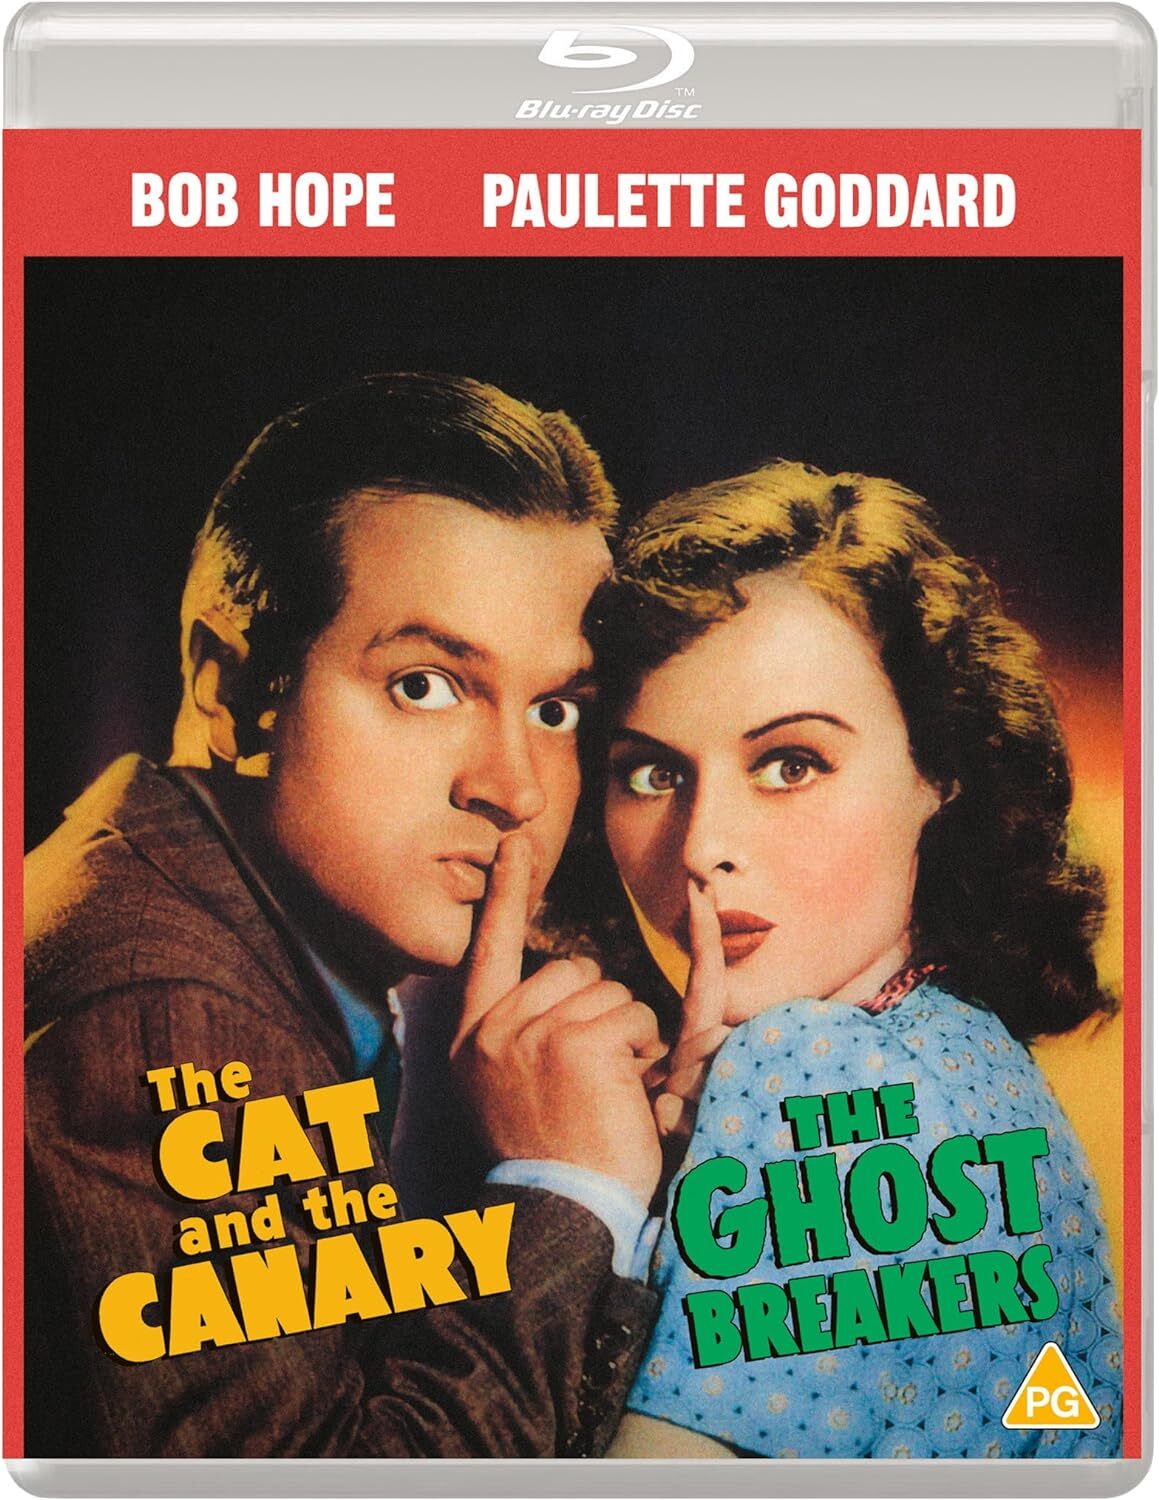 THE CAT AND THE CANARY / THE GHOST BREAKERS (REGION B IMPORT) BLU-RAY